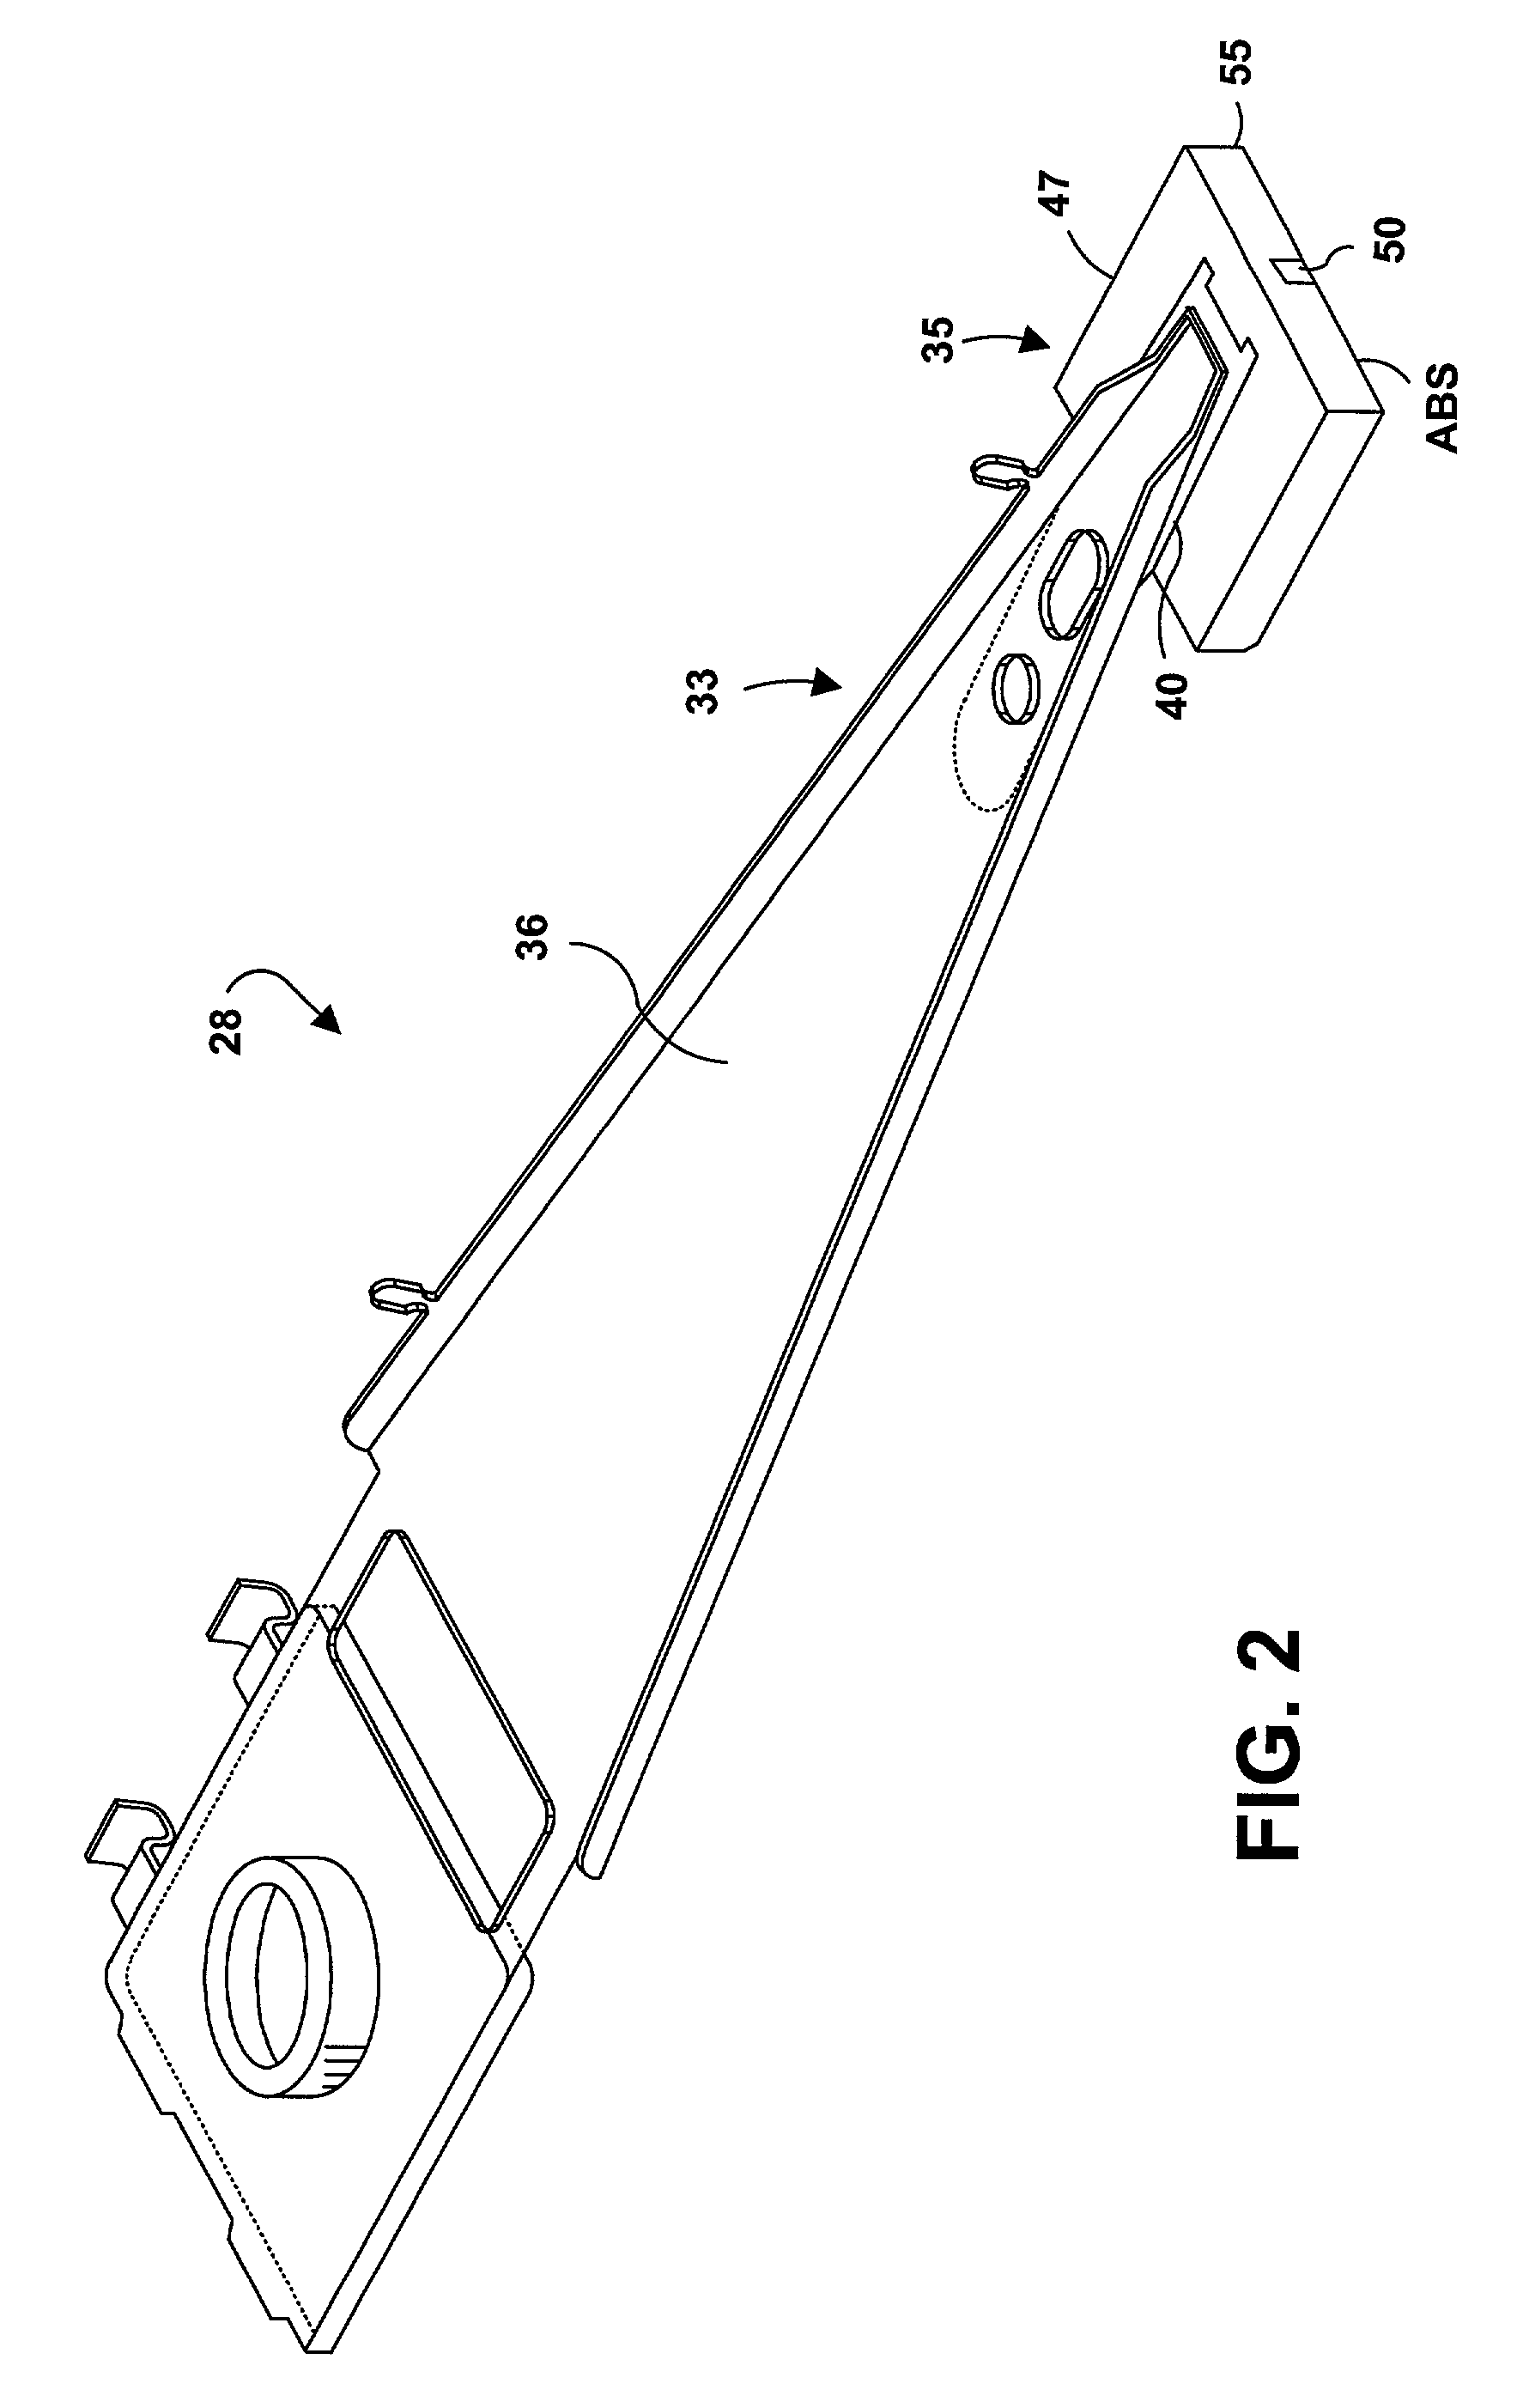 System and method for minimizing thermal pole tip protrusion